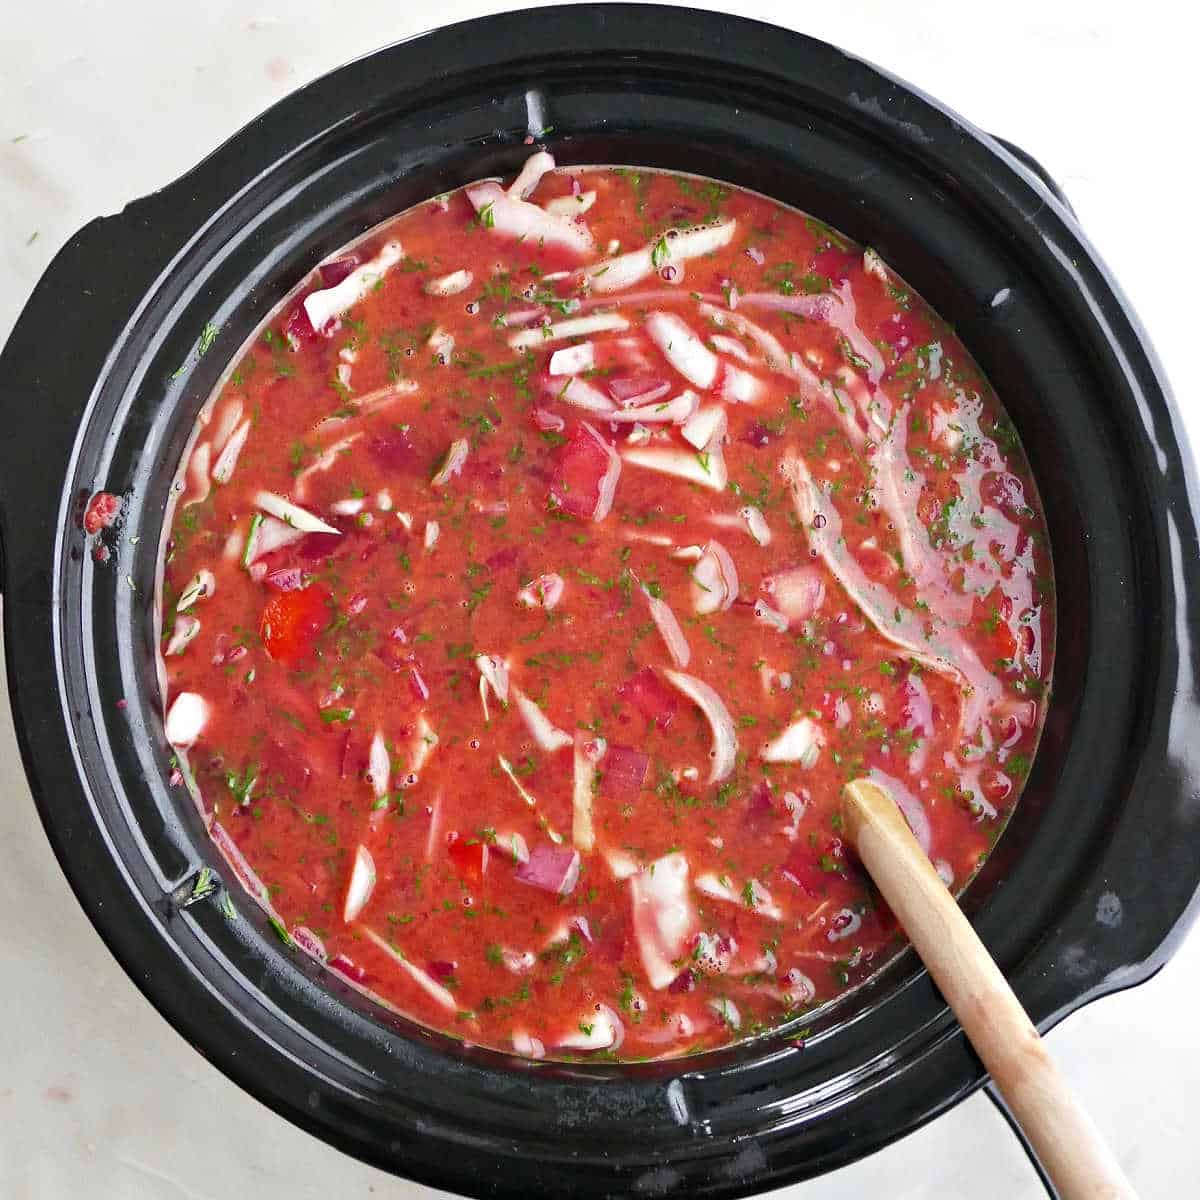 cooked borscht in a slow cooker with cabbage being stirred into it